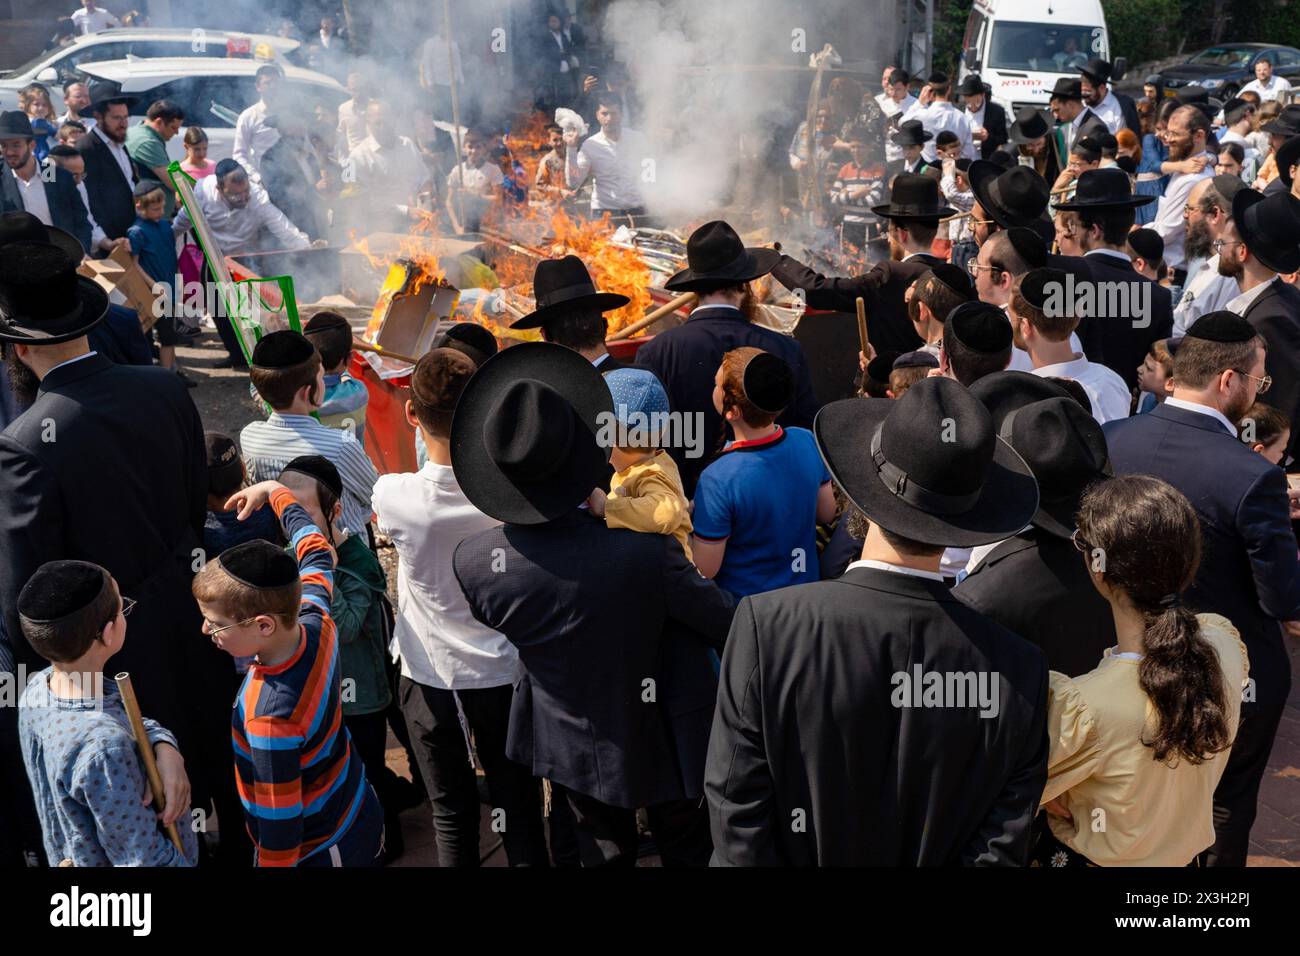 The Jewish Orthodox gather around the fire set to burn the leaven during the Biur Chametz. During the Biur Chametz, religious Jews fulfill their obligation to inspect their homes for any leaven and eliminate it before the night of Passover. In ultra-Orthodox cities in Israel, fires are set up in major locations in the city for this purpose, where people bring their bread leftovers to burn the leaven. During the seven days of Passover, they are prohibited from eating or possessing any leaven, symbolizing the dough the Israelites did not have time to allow to rise before the Exodus from Egypt. B Stock Photo